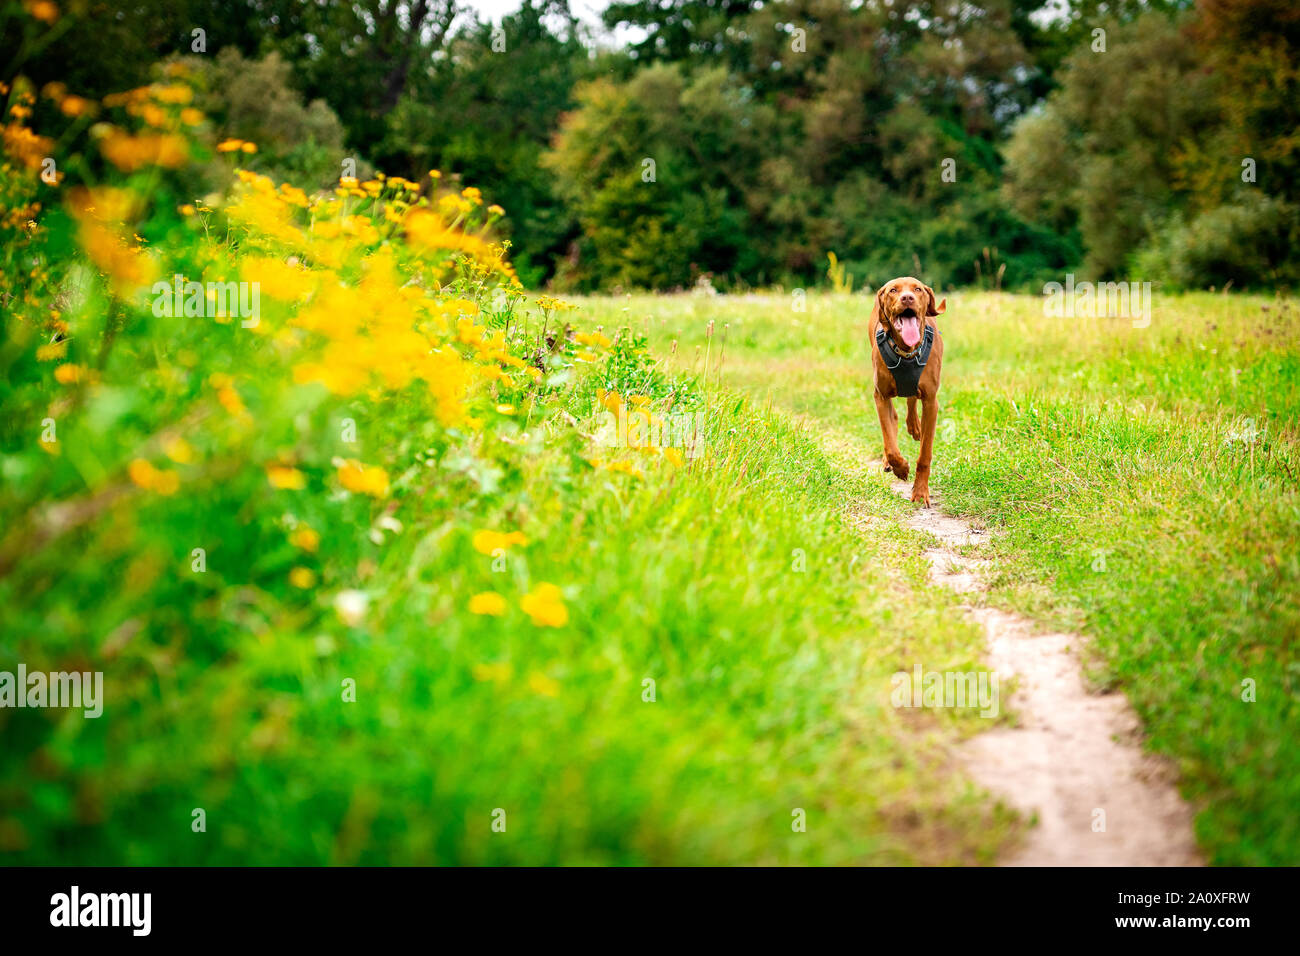 Cute happy vizsla puppy running through meadow full of flowers.  Happy dog portrait outdoors. Stock Photo